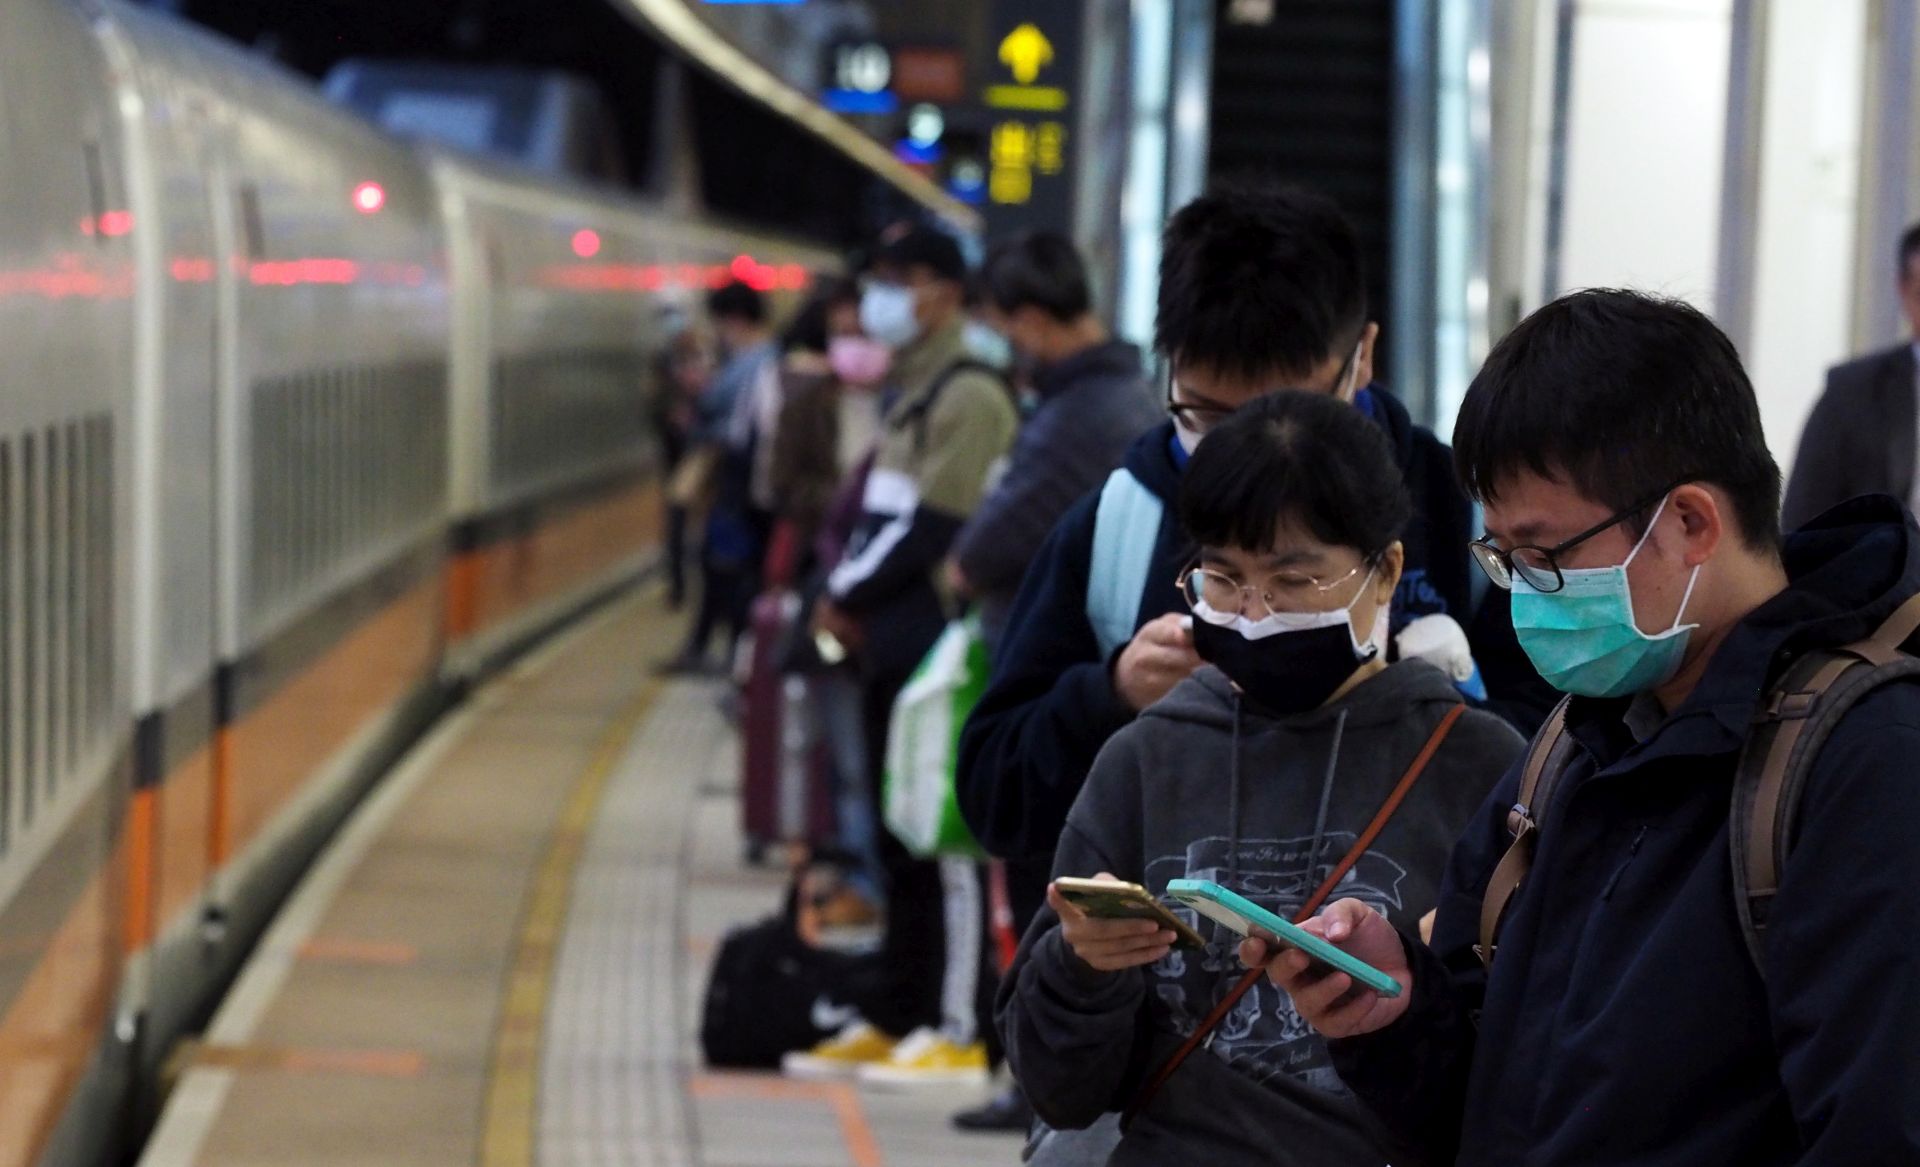 epa08243834 Passengers wearing face masks wait to board a high-speed train at Zuoying Station in Kaohsiung, southern Taiwan, 23 February 2020 (issued on 24 February 2020). On 24 February, the Ministry of Health and Welfare warned Taiwanese against visiting South Korea, and required foreigners arriving from South Korea to adopt 14-day home quarantine as coronavirus has left six people dead and more than 800 people infected in South Korea.  EPA/DAVID CHANG